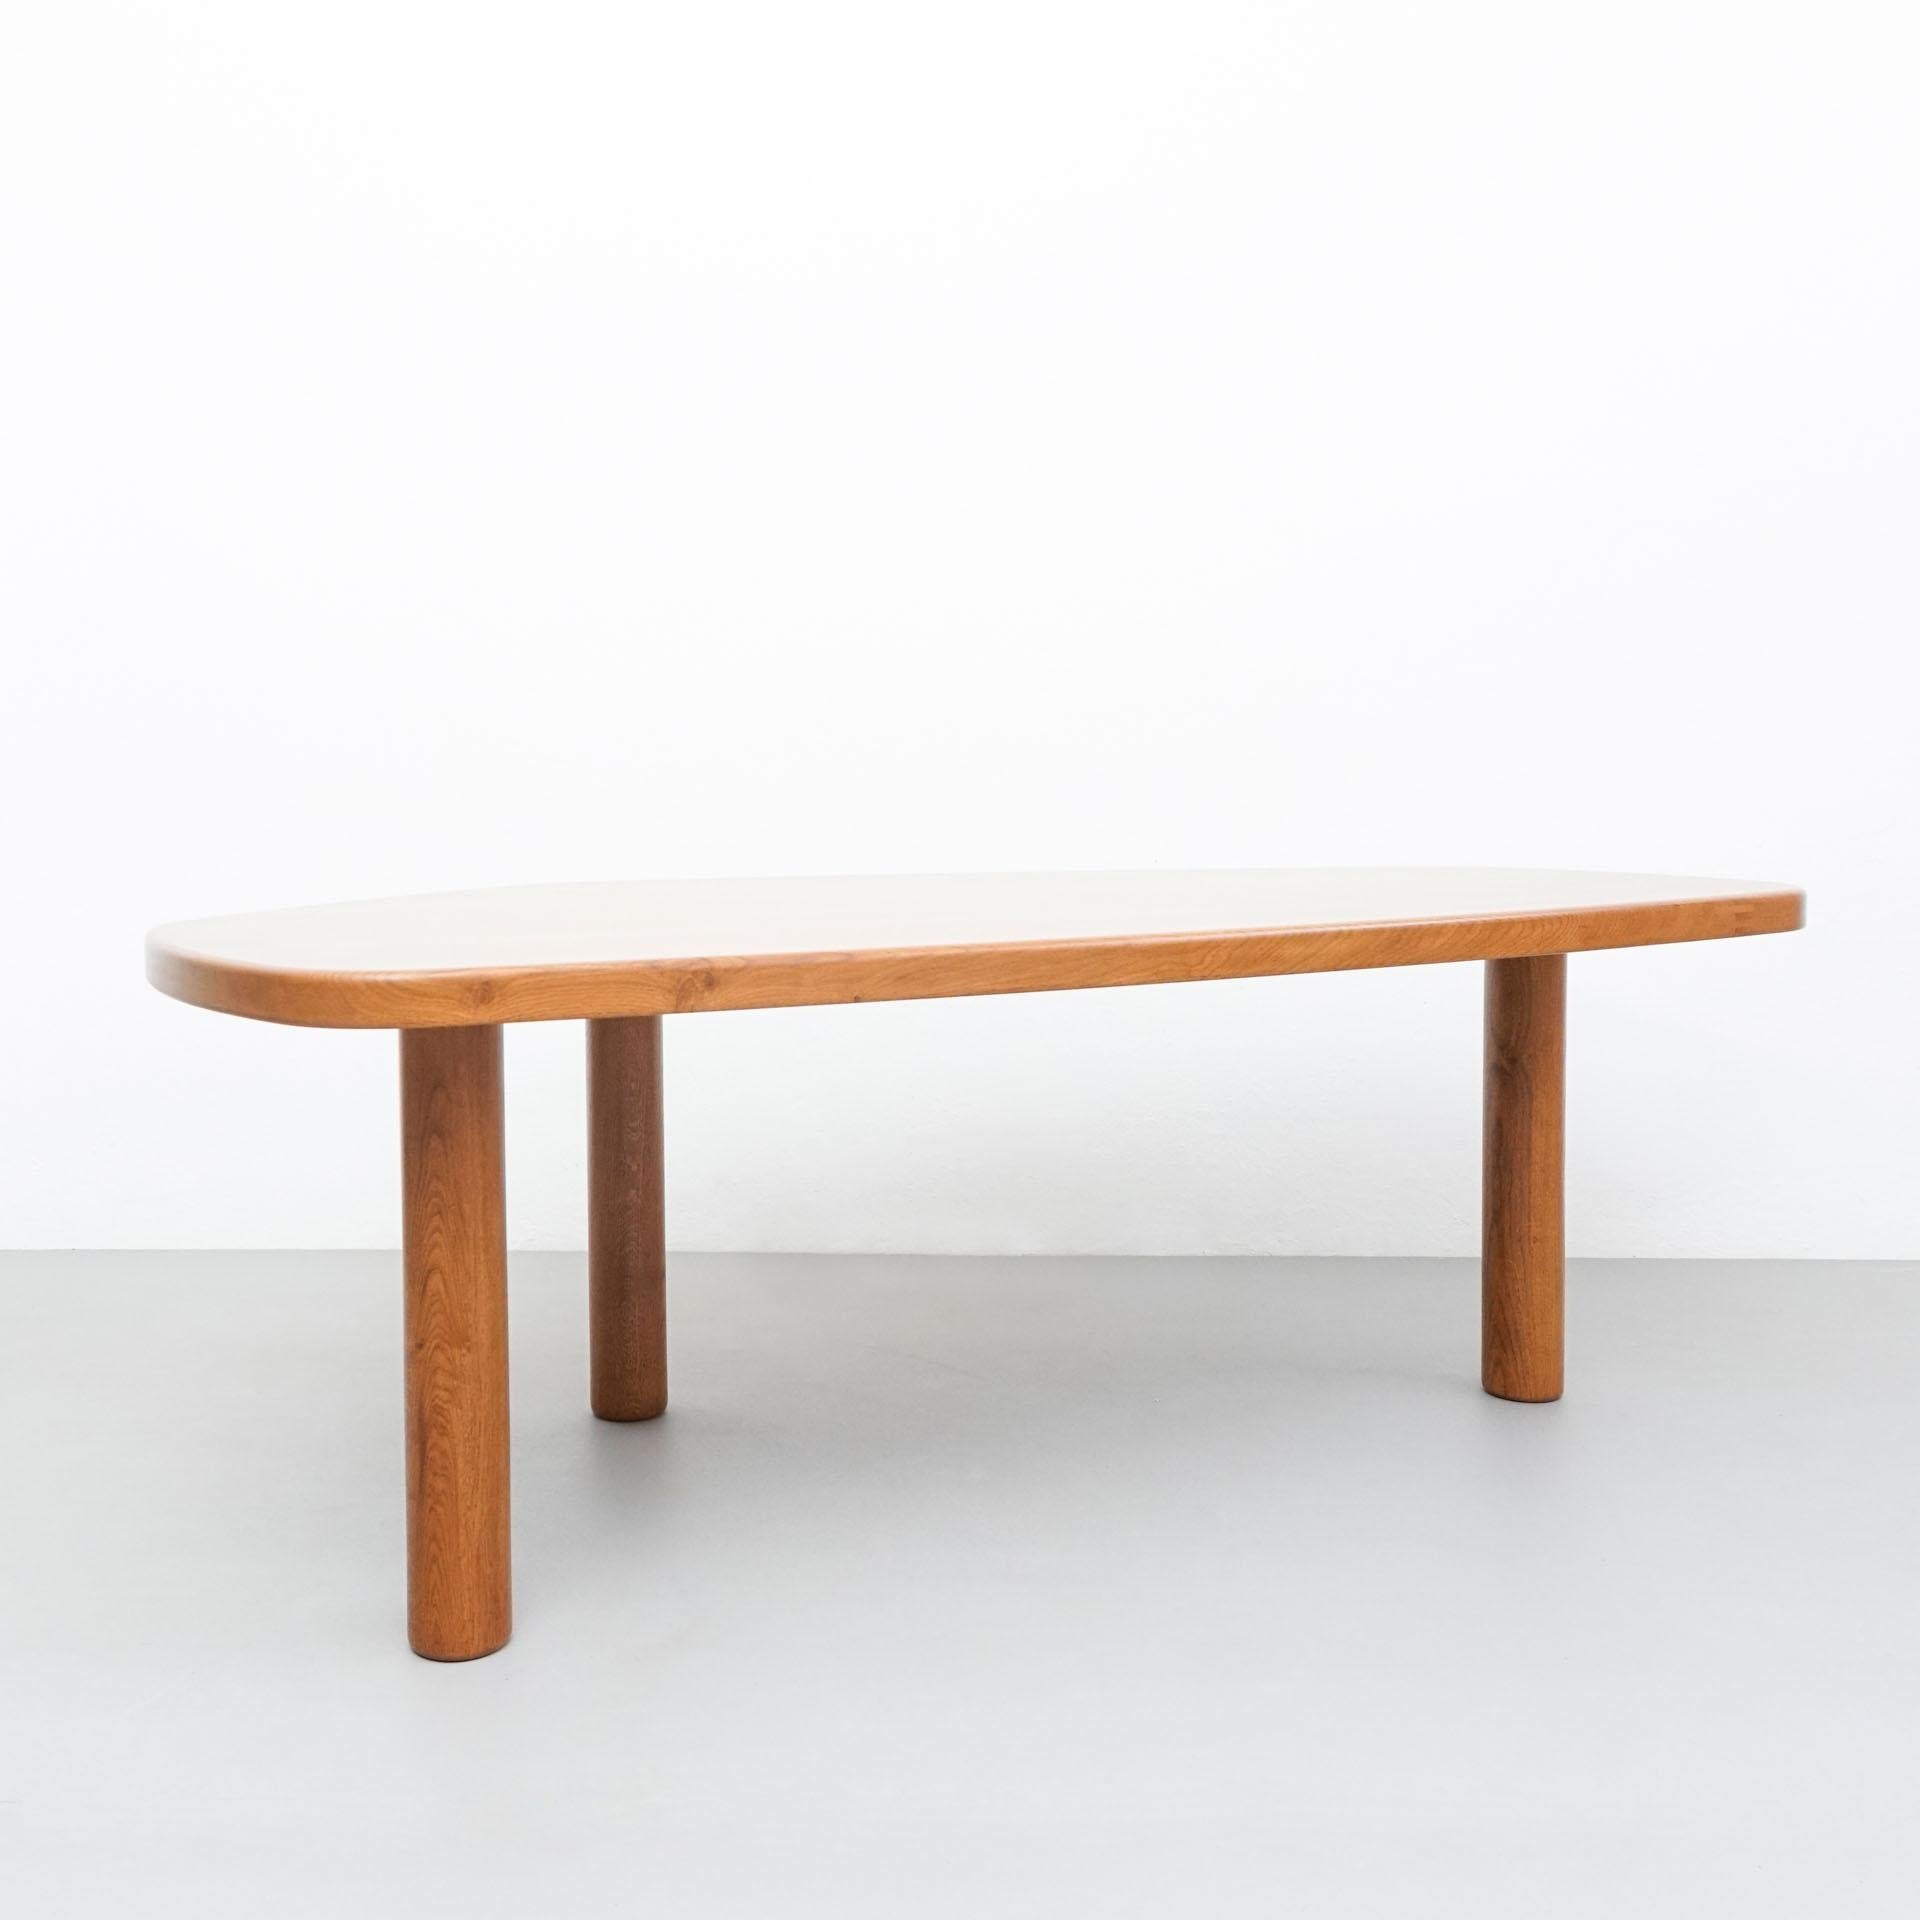 Large freeform dining table by dada - est. manufactured in Barcelona.

Oak

Measures: 112 cm D x 220 cm W x 76 cm H 


Dada Est. / Makes a handmade furniture production with the best materials and finishes as in the old days.

Influenced by